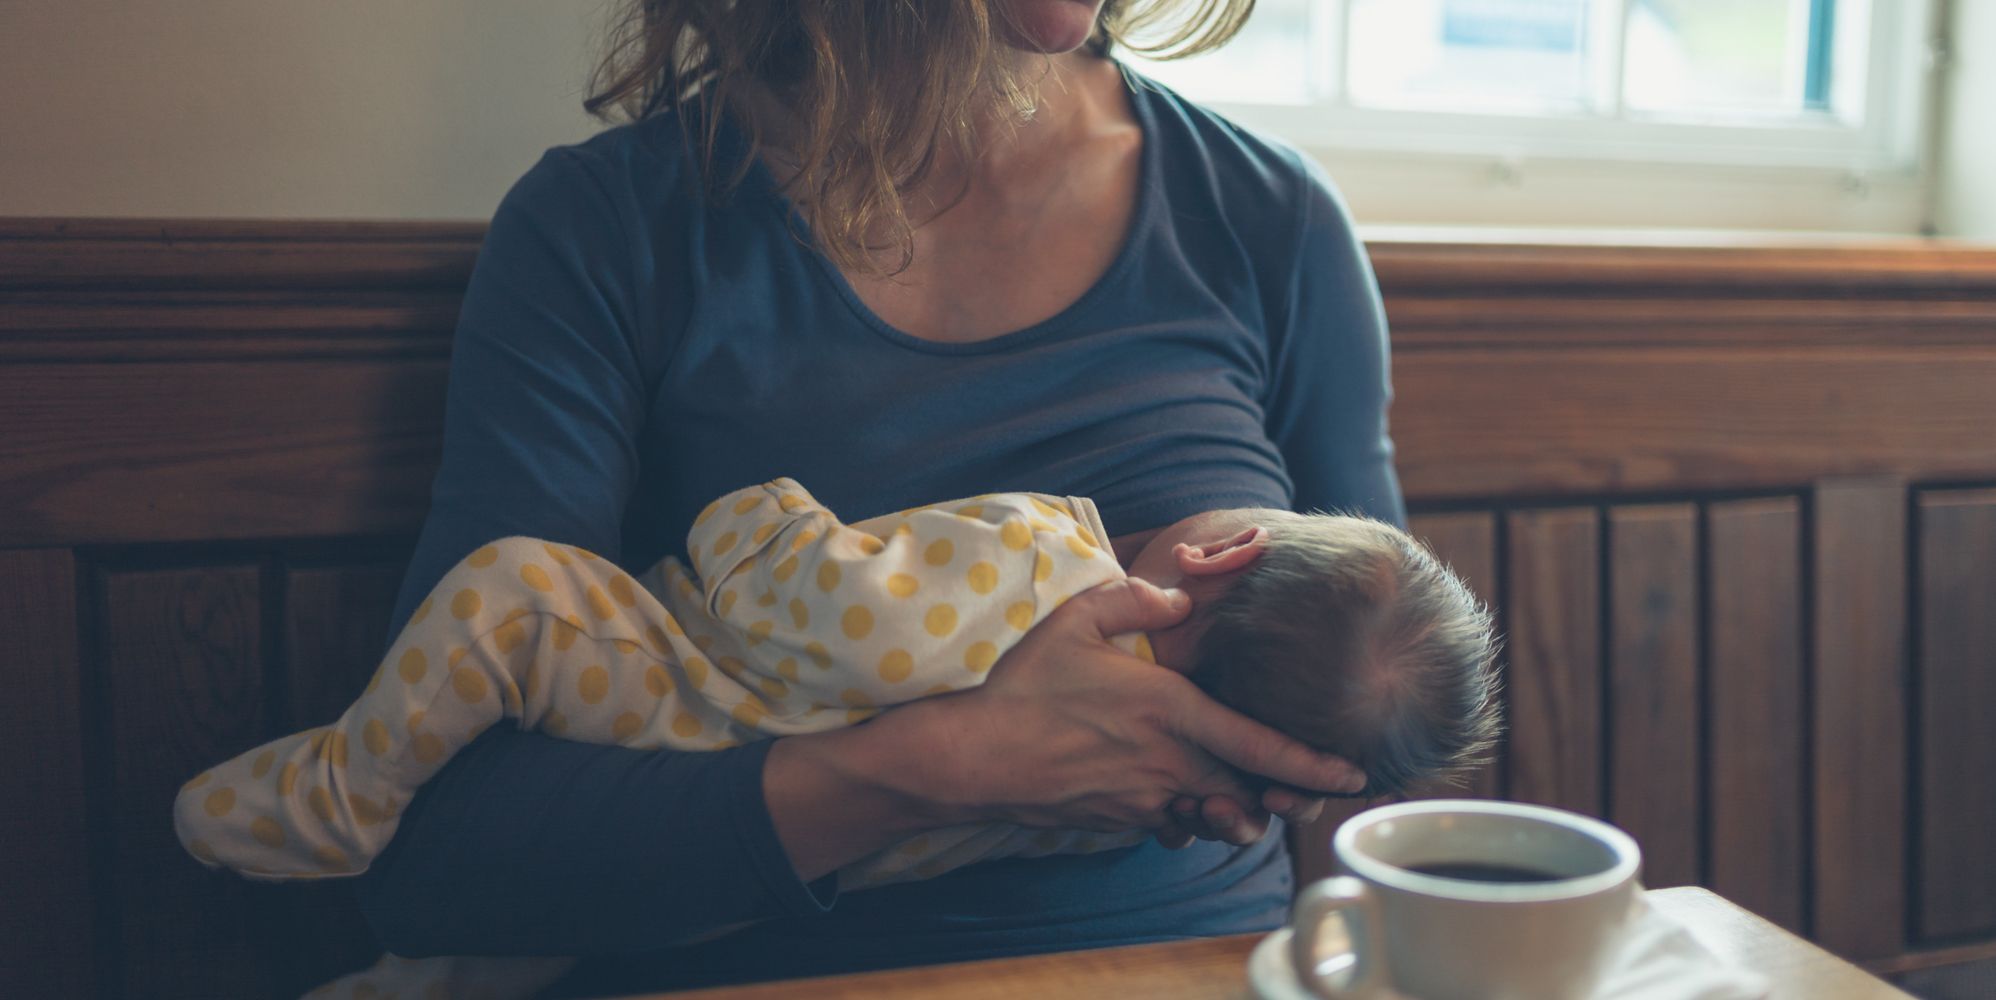 Mums Experiences Of Breastfeeding In Public Arent Always Negative As